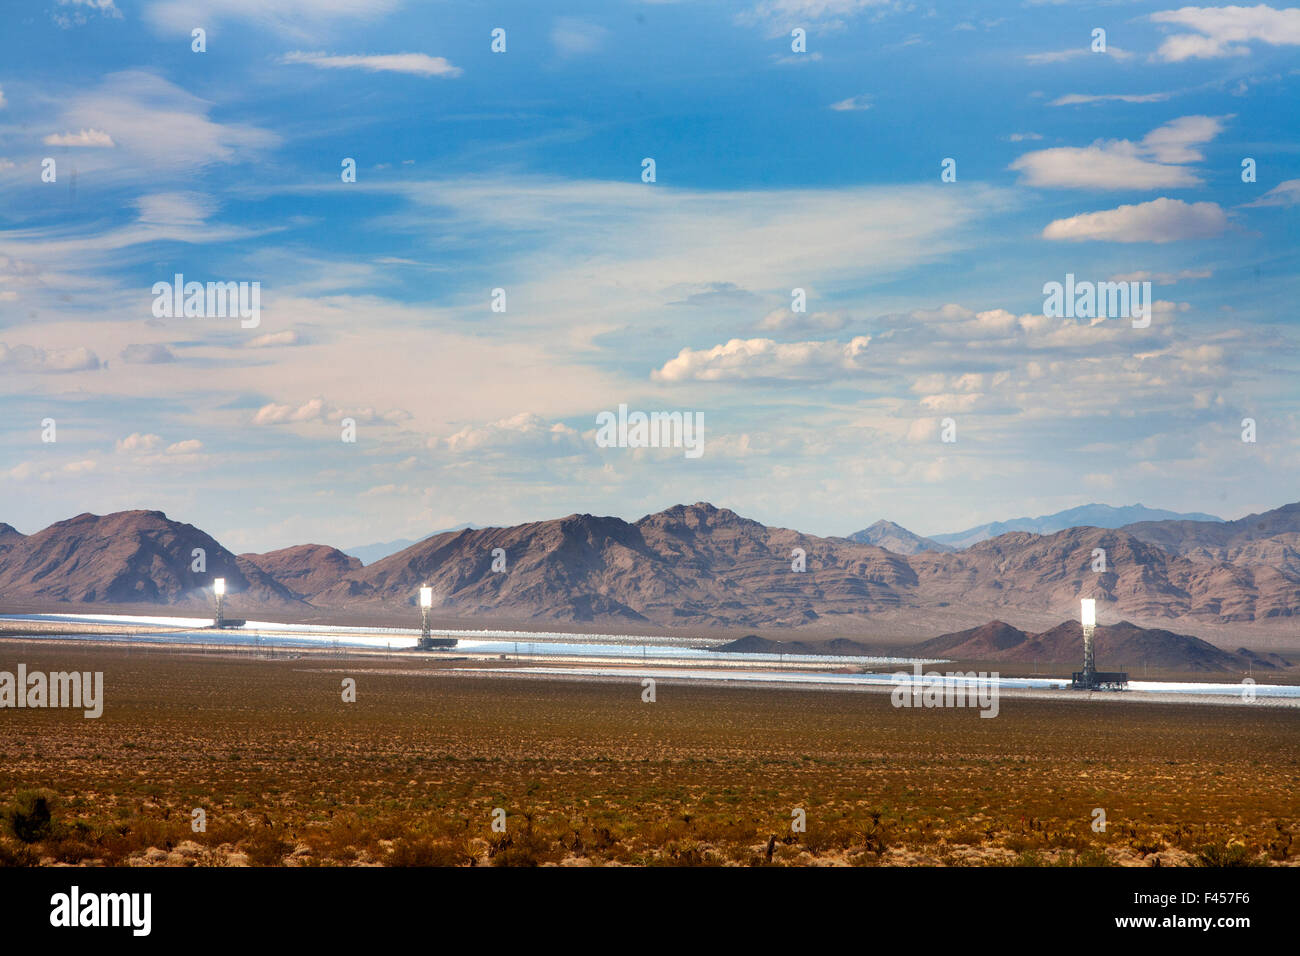 The Ivanpah Solar Electric Generating System is a concentrated solar thermal plant in the California Mojave Desert with a gross capacity of 392 megawatts. It deploys 173,500 heliostats focusing solar energy on boilers in centralized solar power towers. Stock Photo